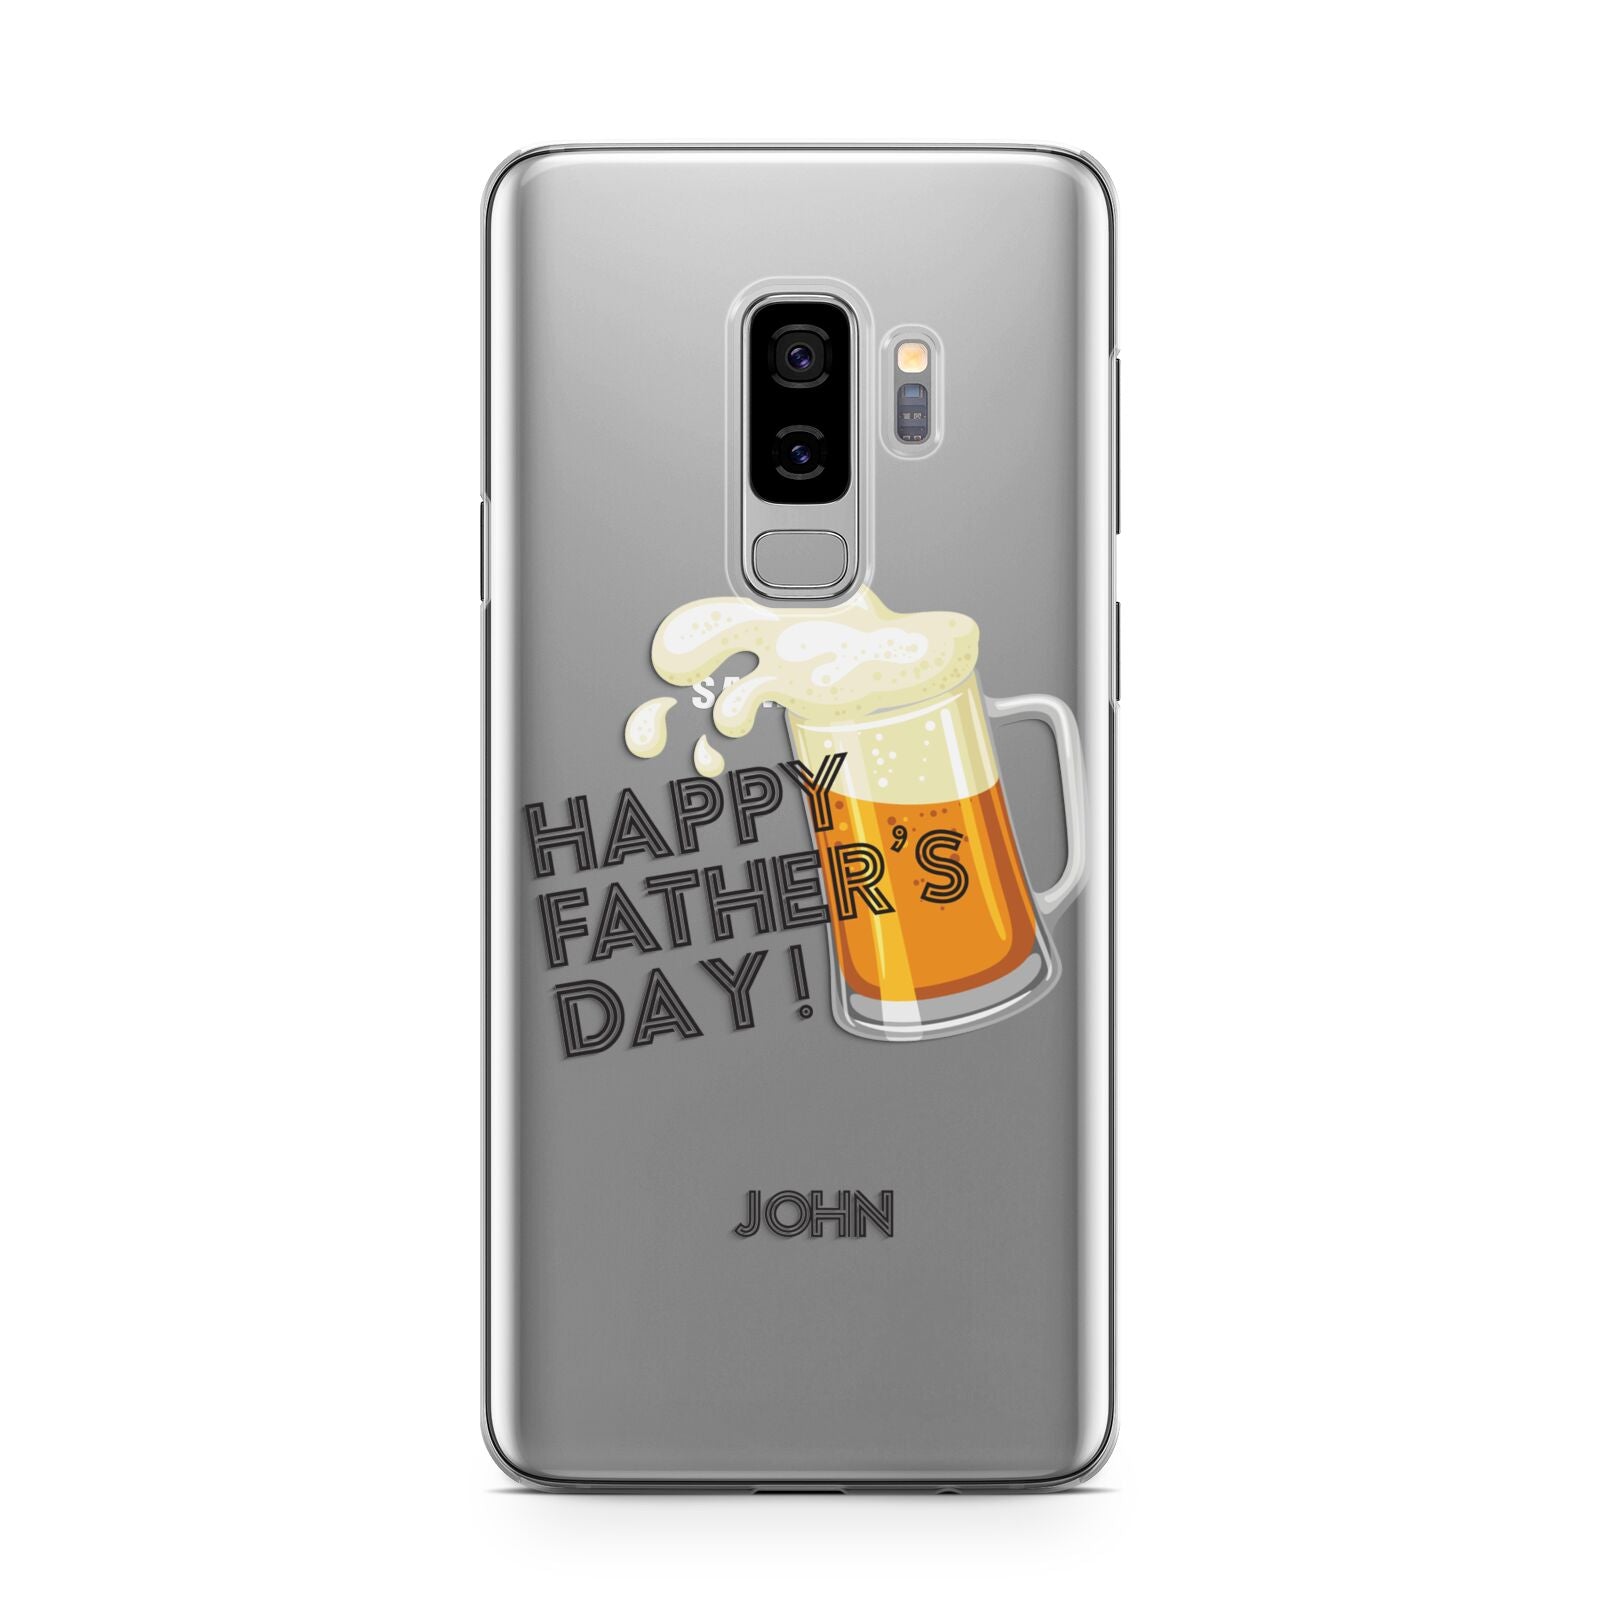 Fathers Day Custom Samsung Galaxy S9 Plus Case on Silver phone